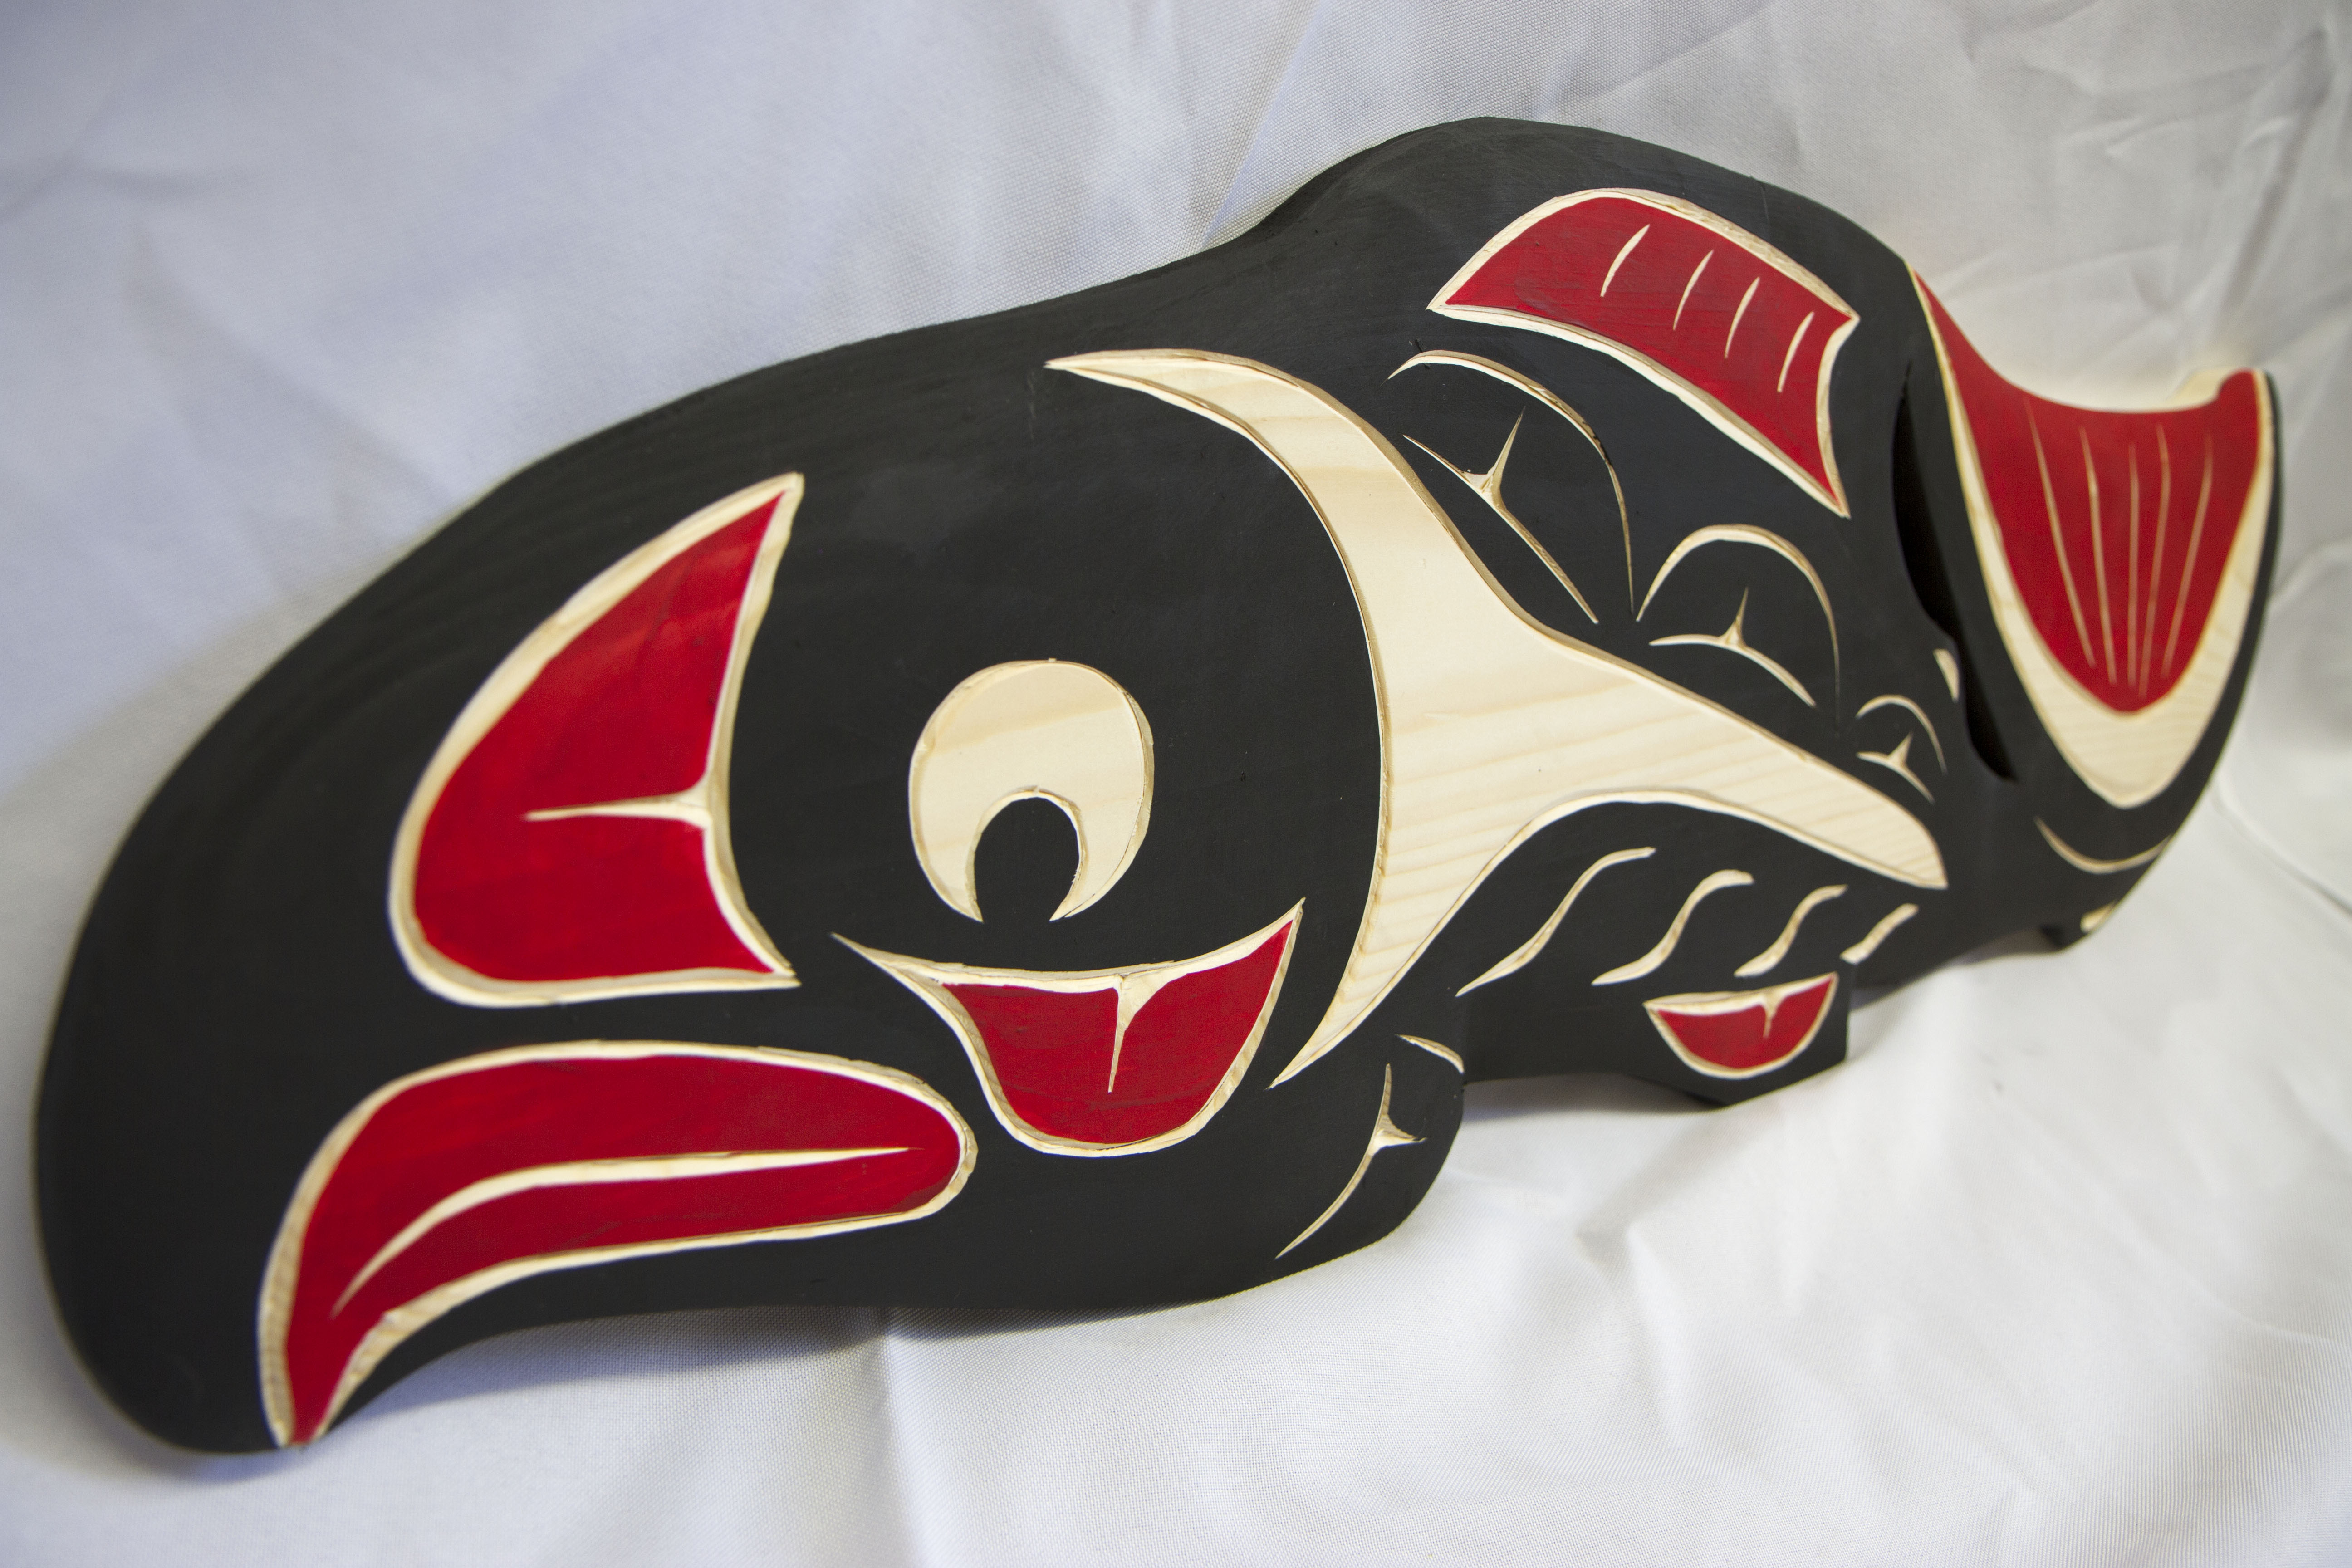 Coast Salish artists are the backbone of the TL’aneq’ fundraiser. Art, including this carving by Steven Charlie of the Squamish Nation, is donated by the artists each year and all of the profits help support a selected NWIC project or program. This year, all funds raised will go toward scholarships for NWIC students. Photo courtesy of NWIC